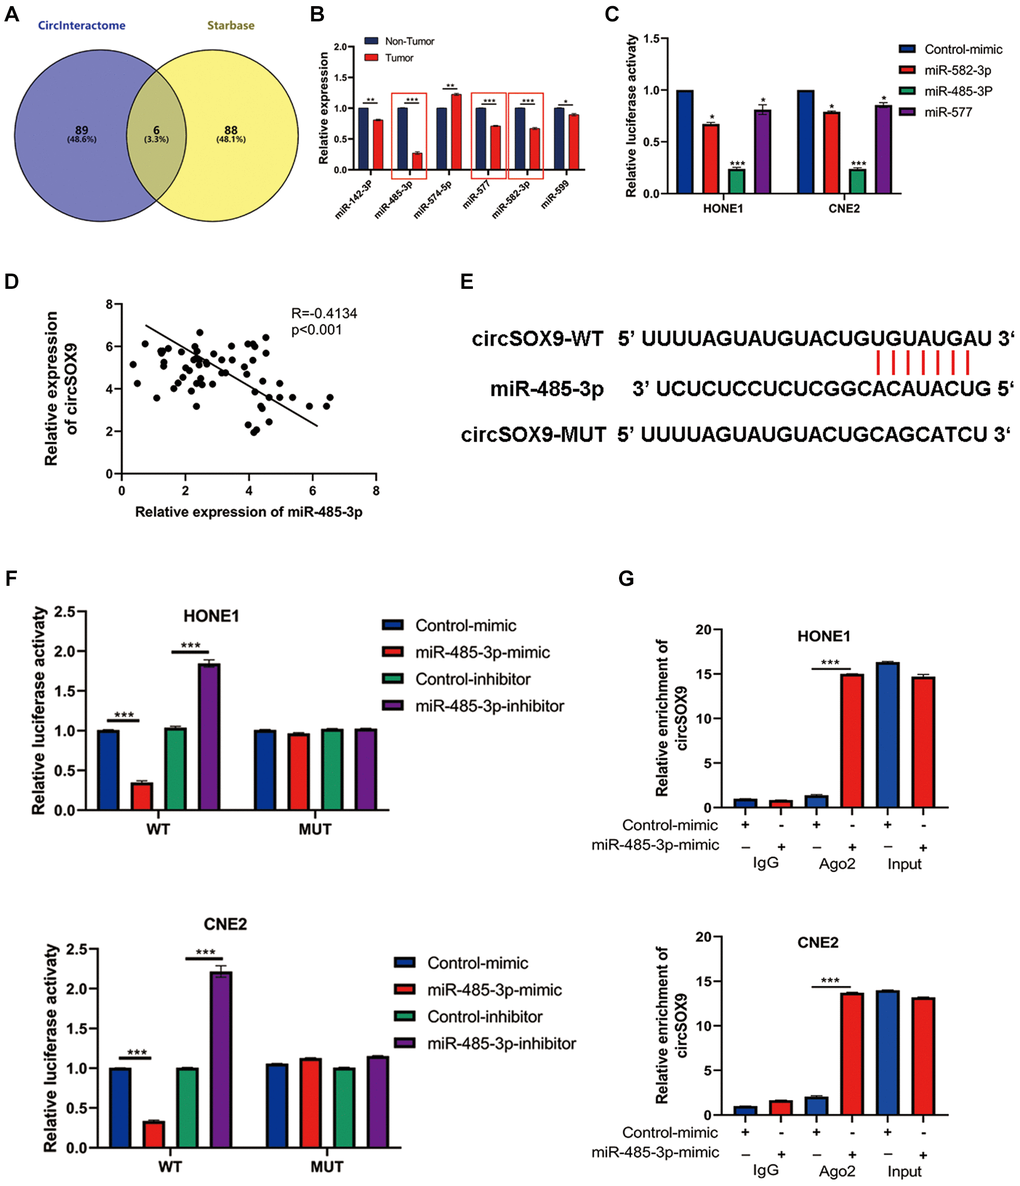 MiR-485-3p was the sponge target of circSOX9 in NPC cells. (A) Use predictive software (CircInteractome, Starbase) for bioinformatics analysis of potential target genes. (B) qRT-PCR analysis of target miRNAs in NPC tumors and para-tumor tissues. (C) Dual-luciferase reporter gene assay detects the interaction of circSOX9 and miR-485-3p, miR-577, and miR-582-3p. (D) qRT-PCR analysis of the expression correlation of circSOX9 and miR-485-3p in NPC. (E) The binding site between circSOX9-wt and miR-485-3p, and the mutant sequence (circSOX9-mut) that cannot bind to miR-485-3p was designed. (F) The dual-luciferase reporter gene assay proved the direct binding between circSOX9 and miR-485-3p in HONE1 and CNE2 cells. (G) RIP assay verified the combination of circsox9 and miR-485-3p with Ago2).*P **P ***P 